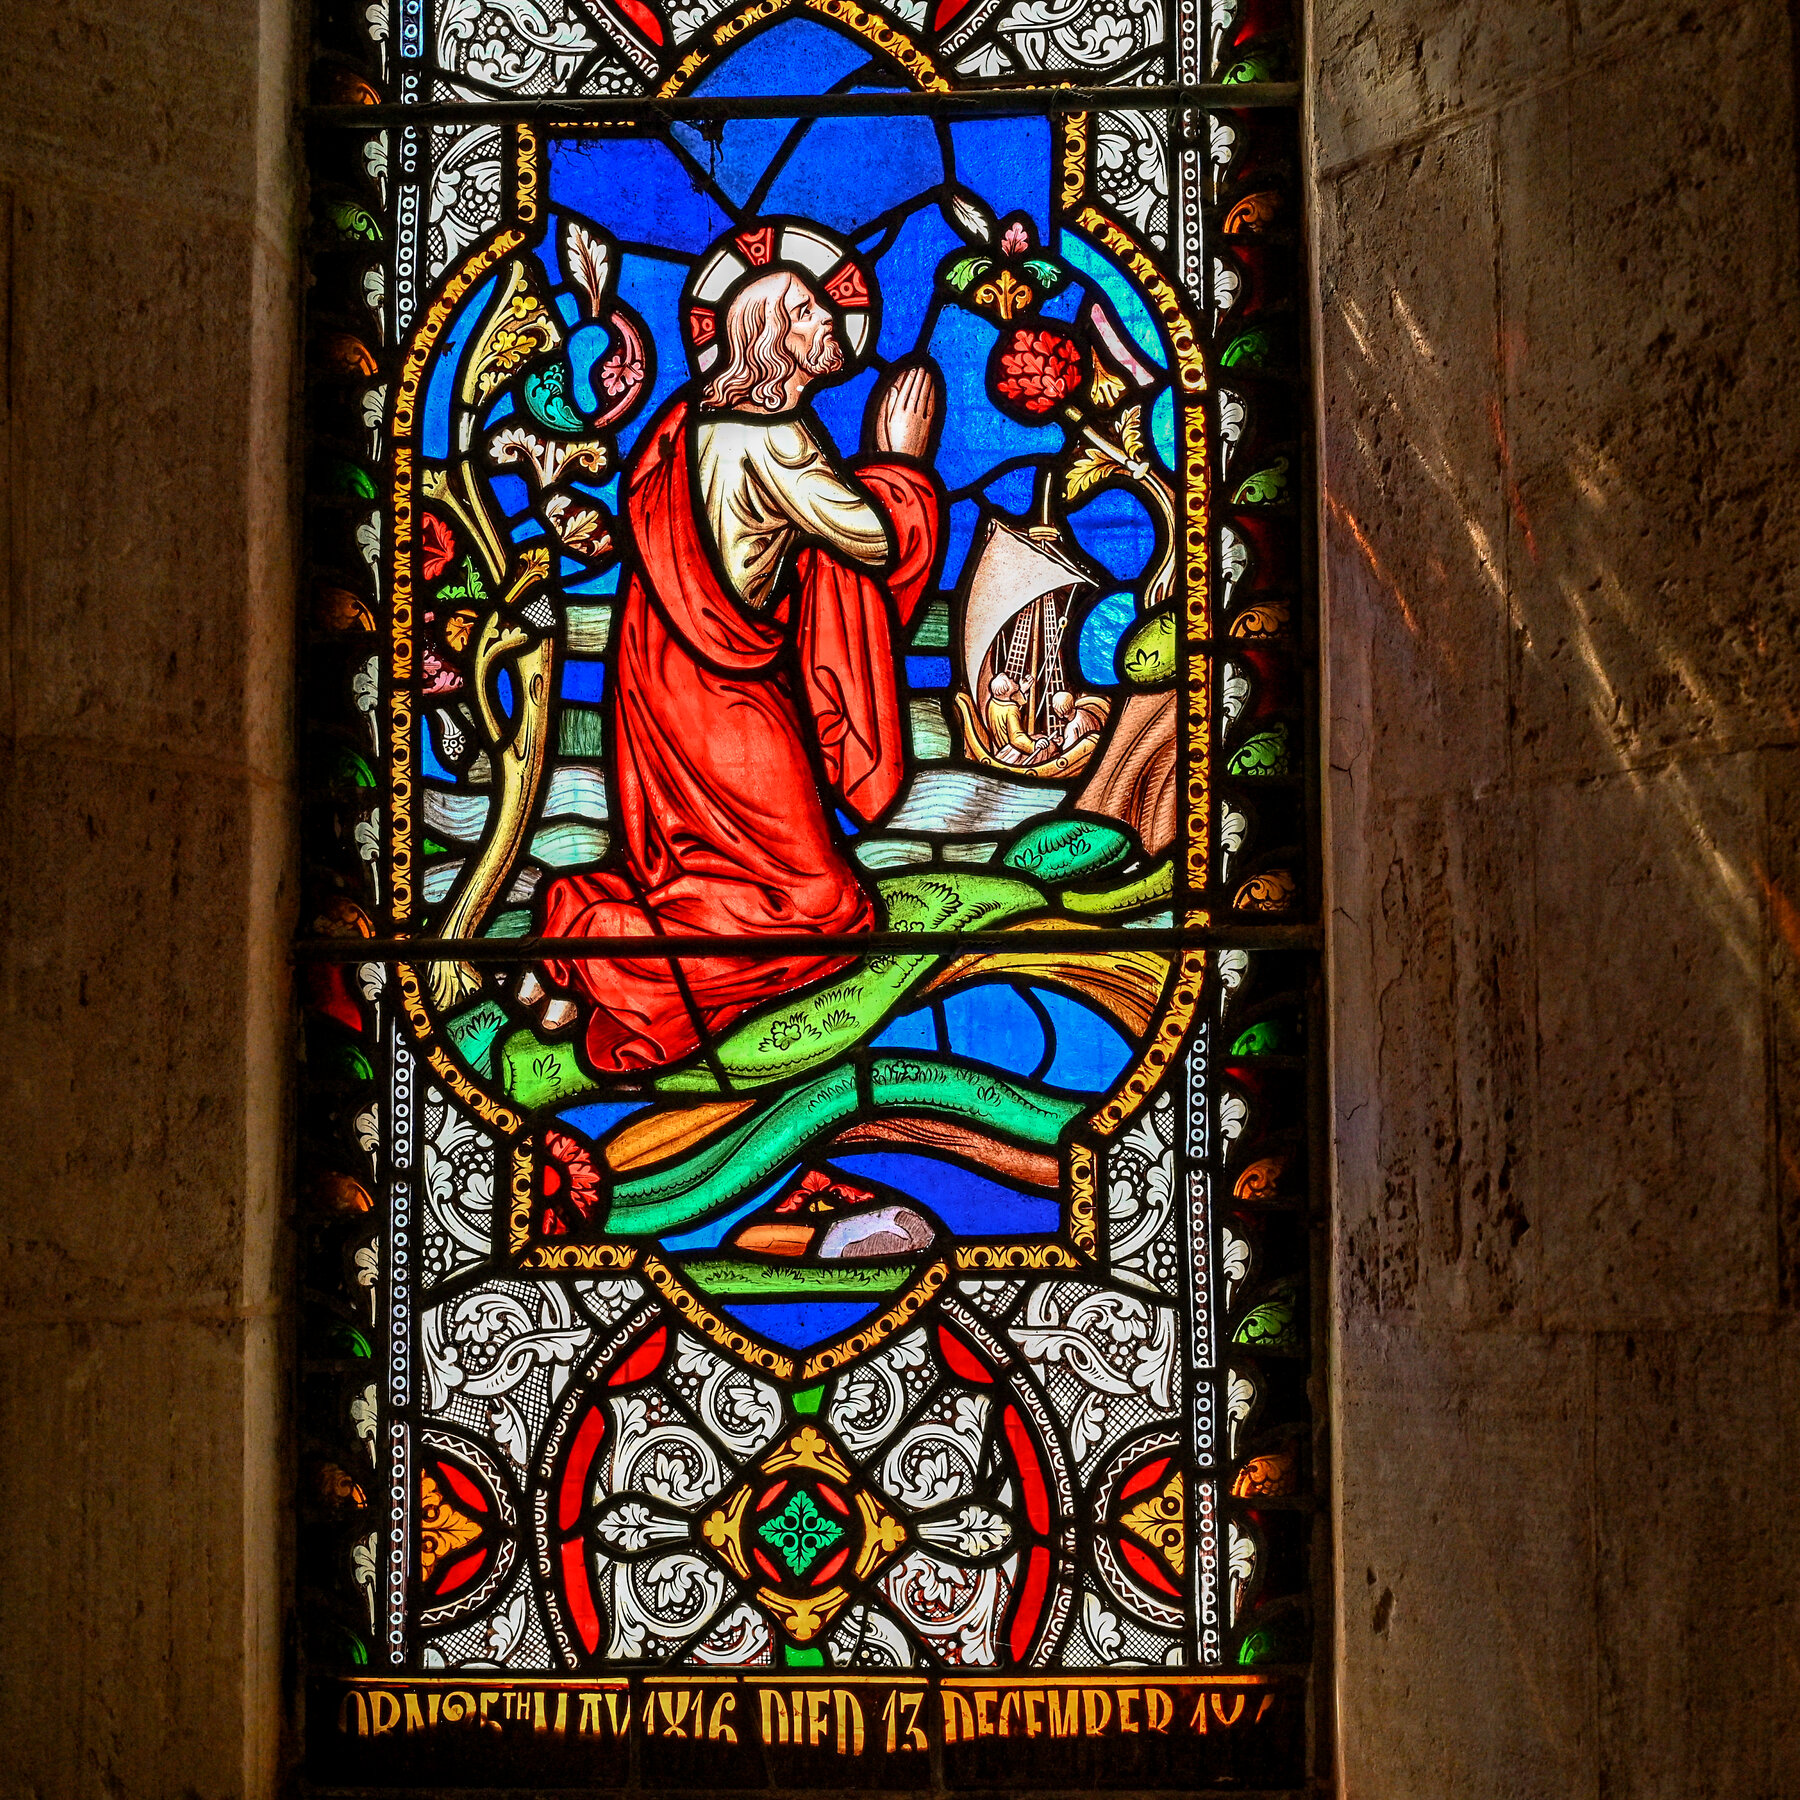 A close-up of a stained glass window depicting a man in a red robe kneeling in prayer. 